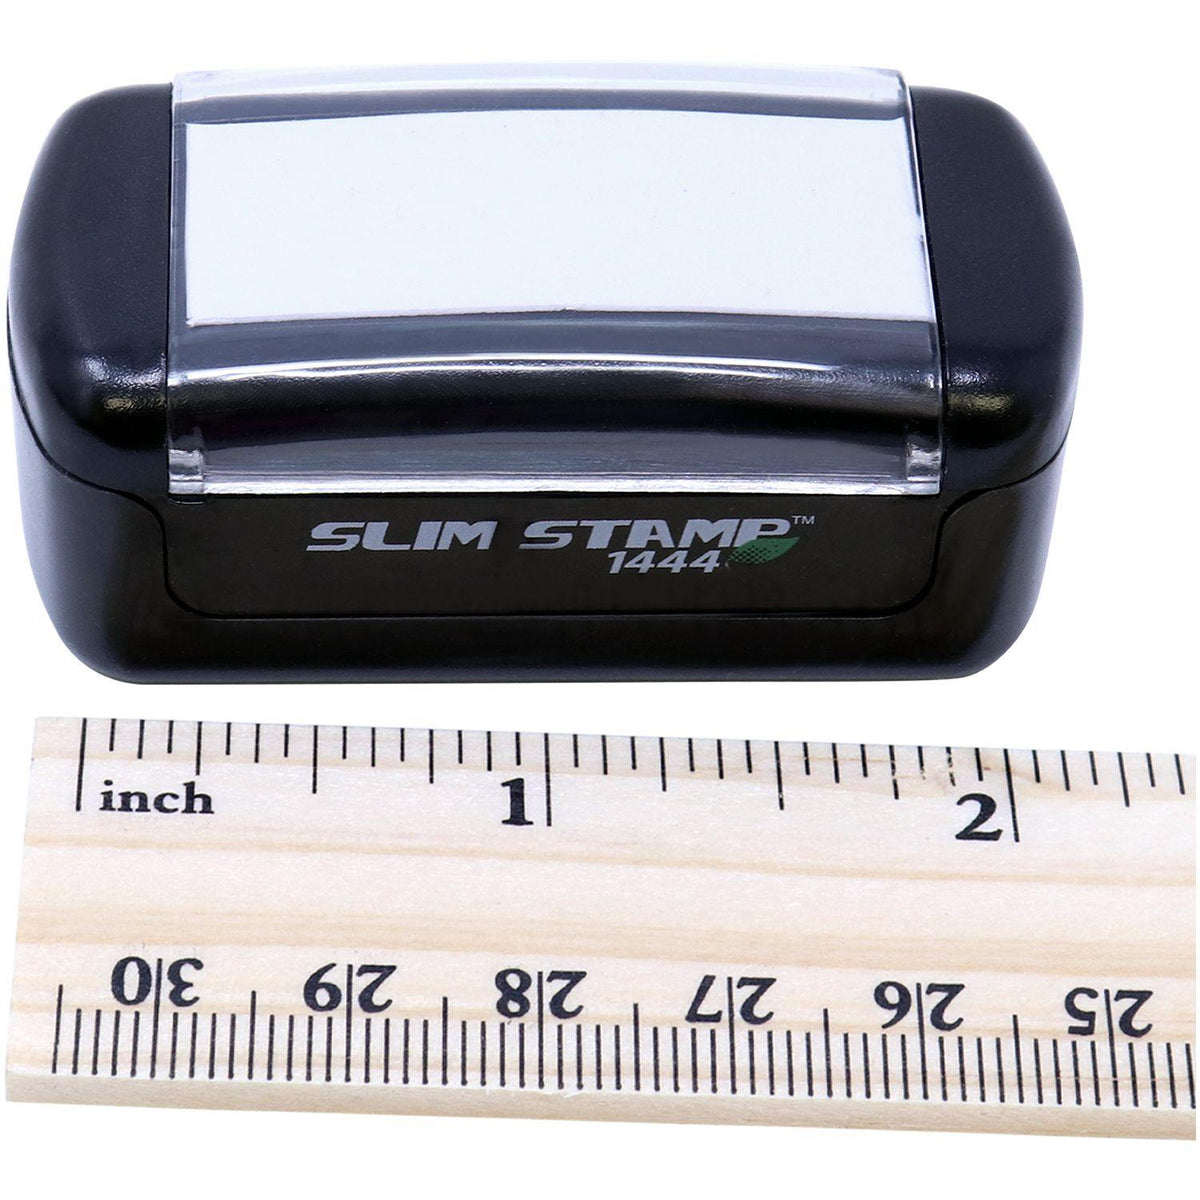 Measurement Slim Pre-Inked Stop Covid Patient Stamp with Ruler